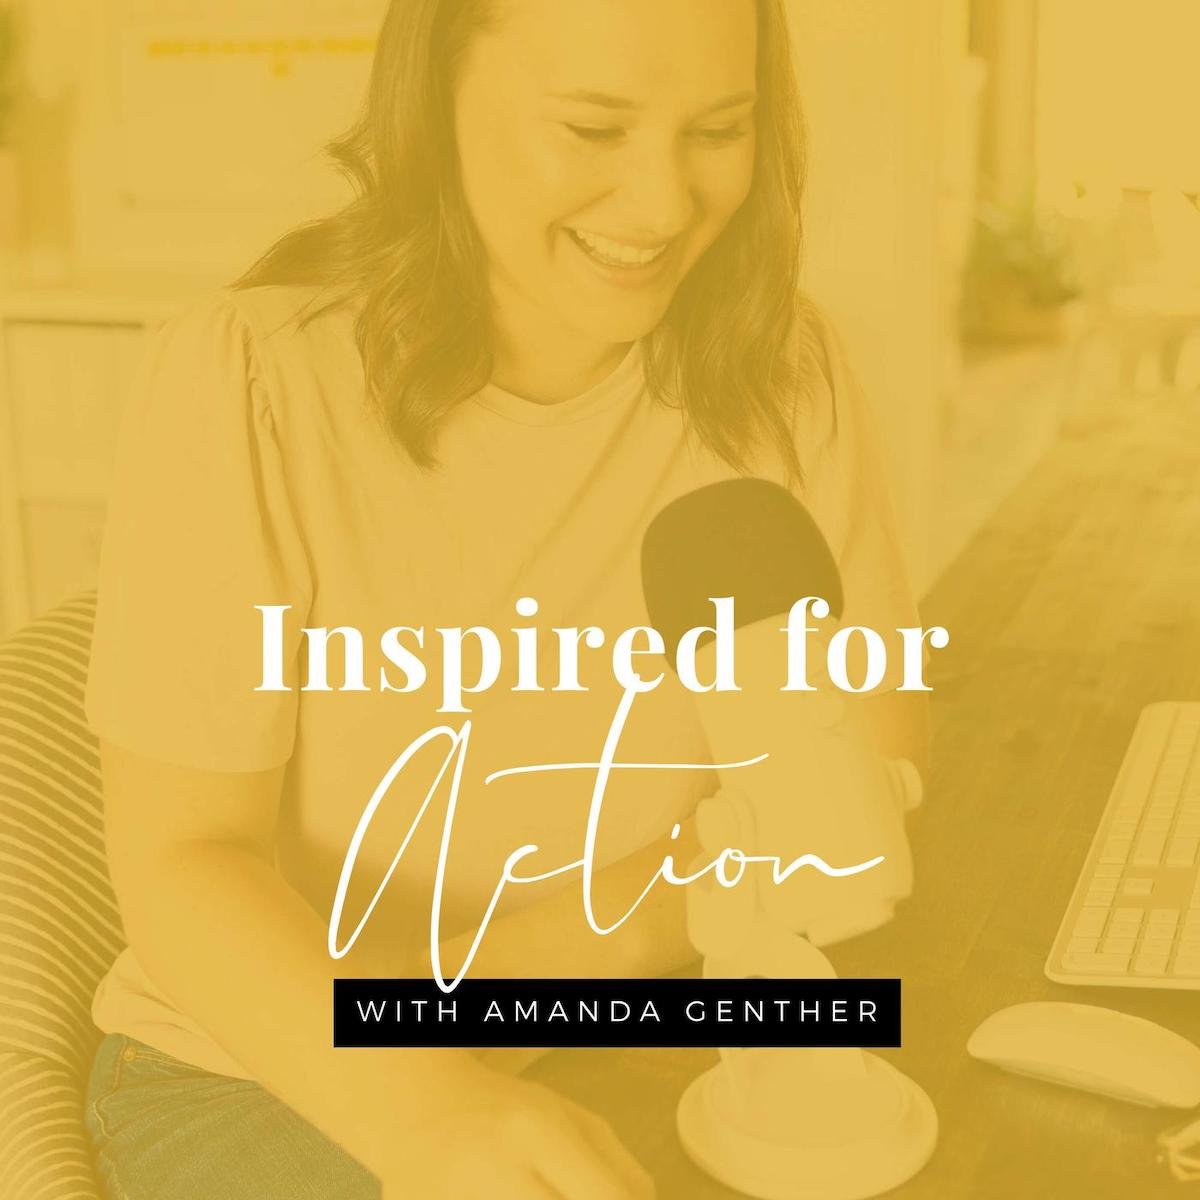 Inspired for Action podcast with Amanda Genther